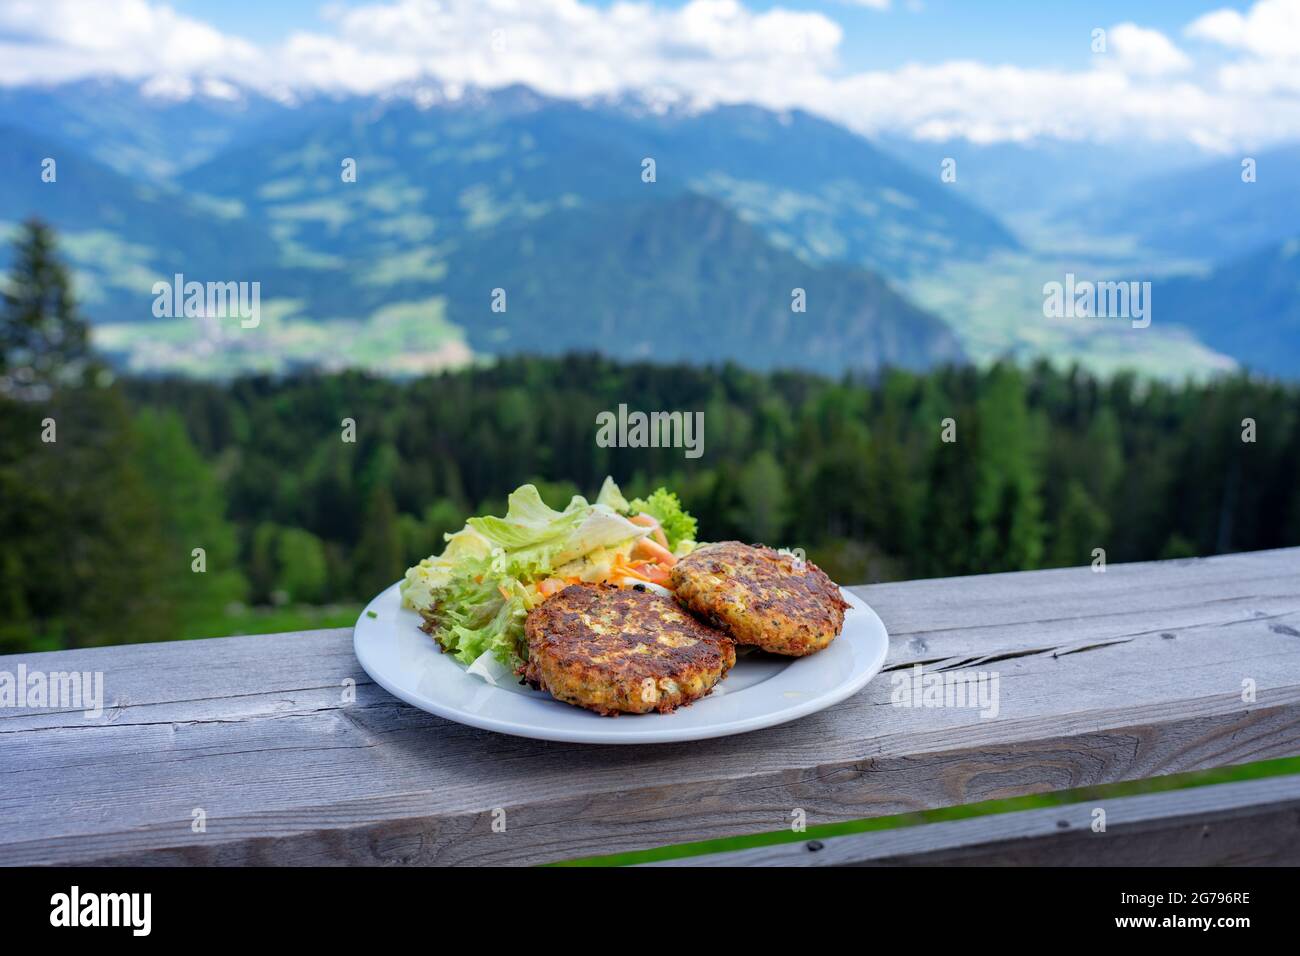 traditional local kaspressknodel cheese dumpling in tirol austria with mountain view landscape Stock Photo